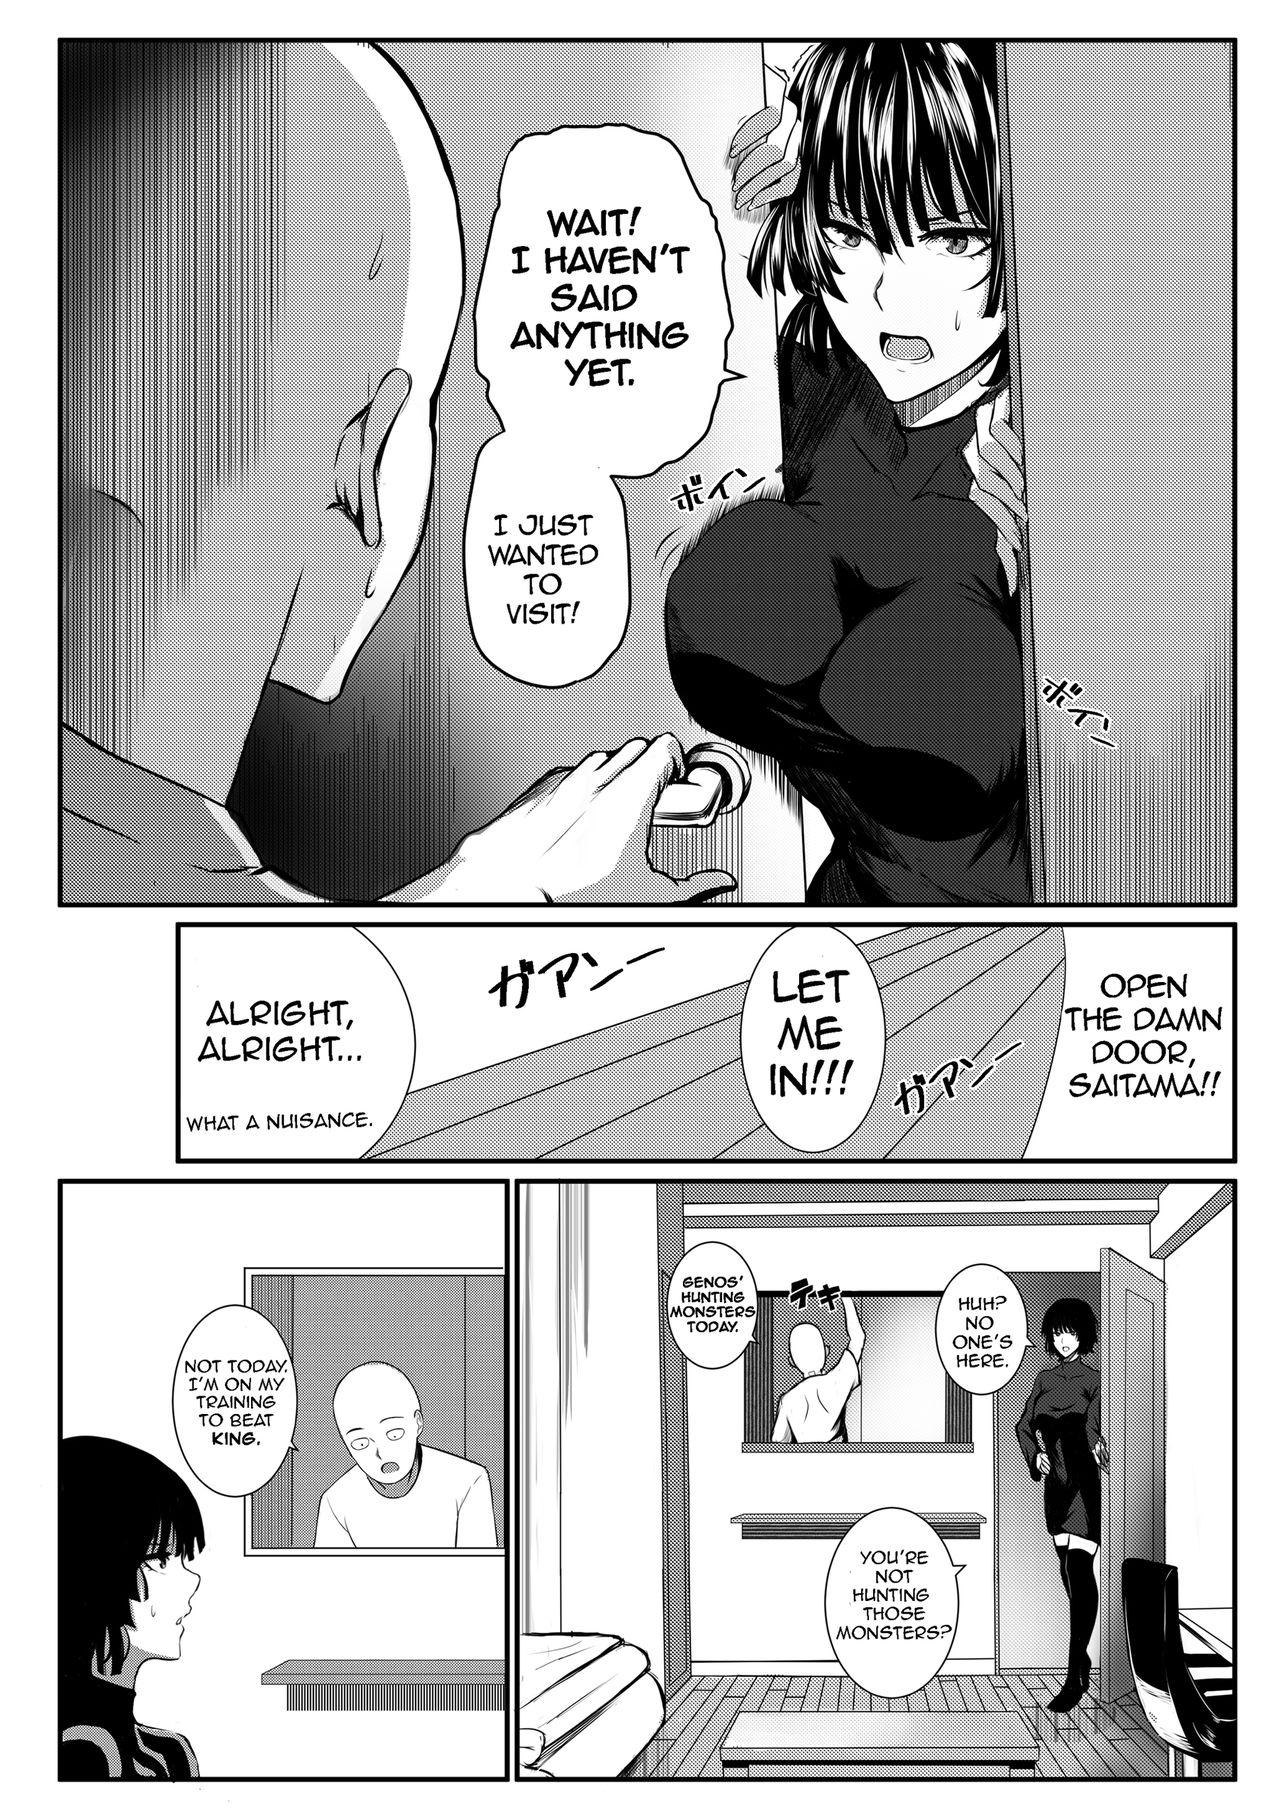 Longhair ONE THRUST-MAN - One punch man Blonde - Page 4